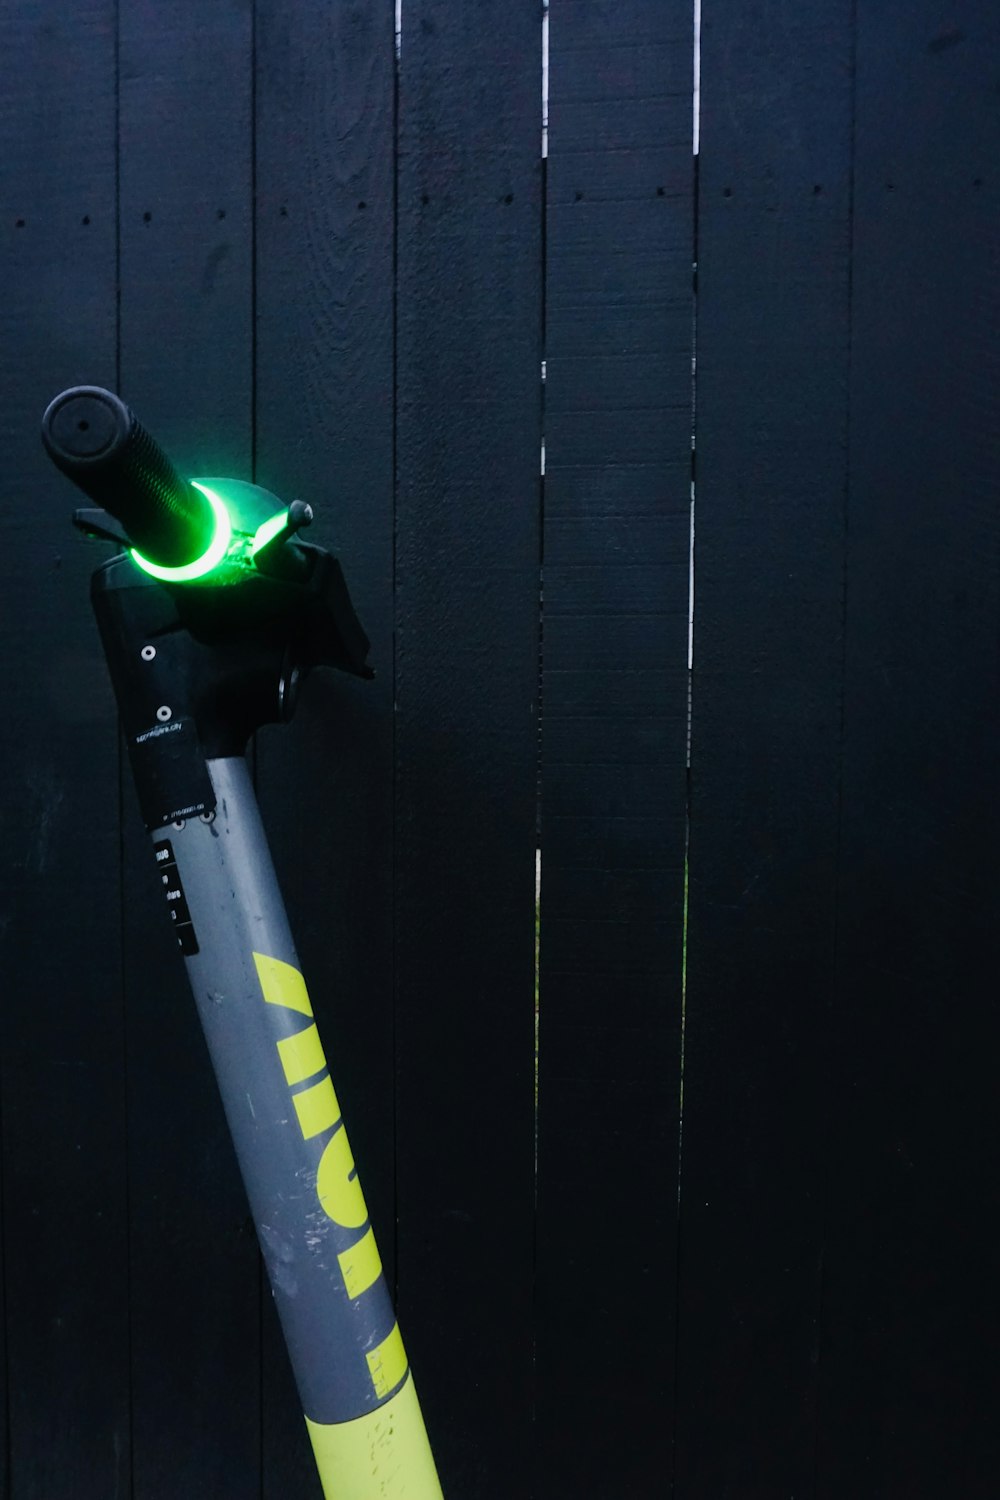 a close up of a bike with a green light on it